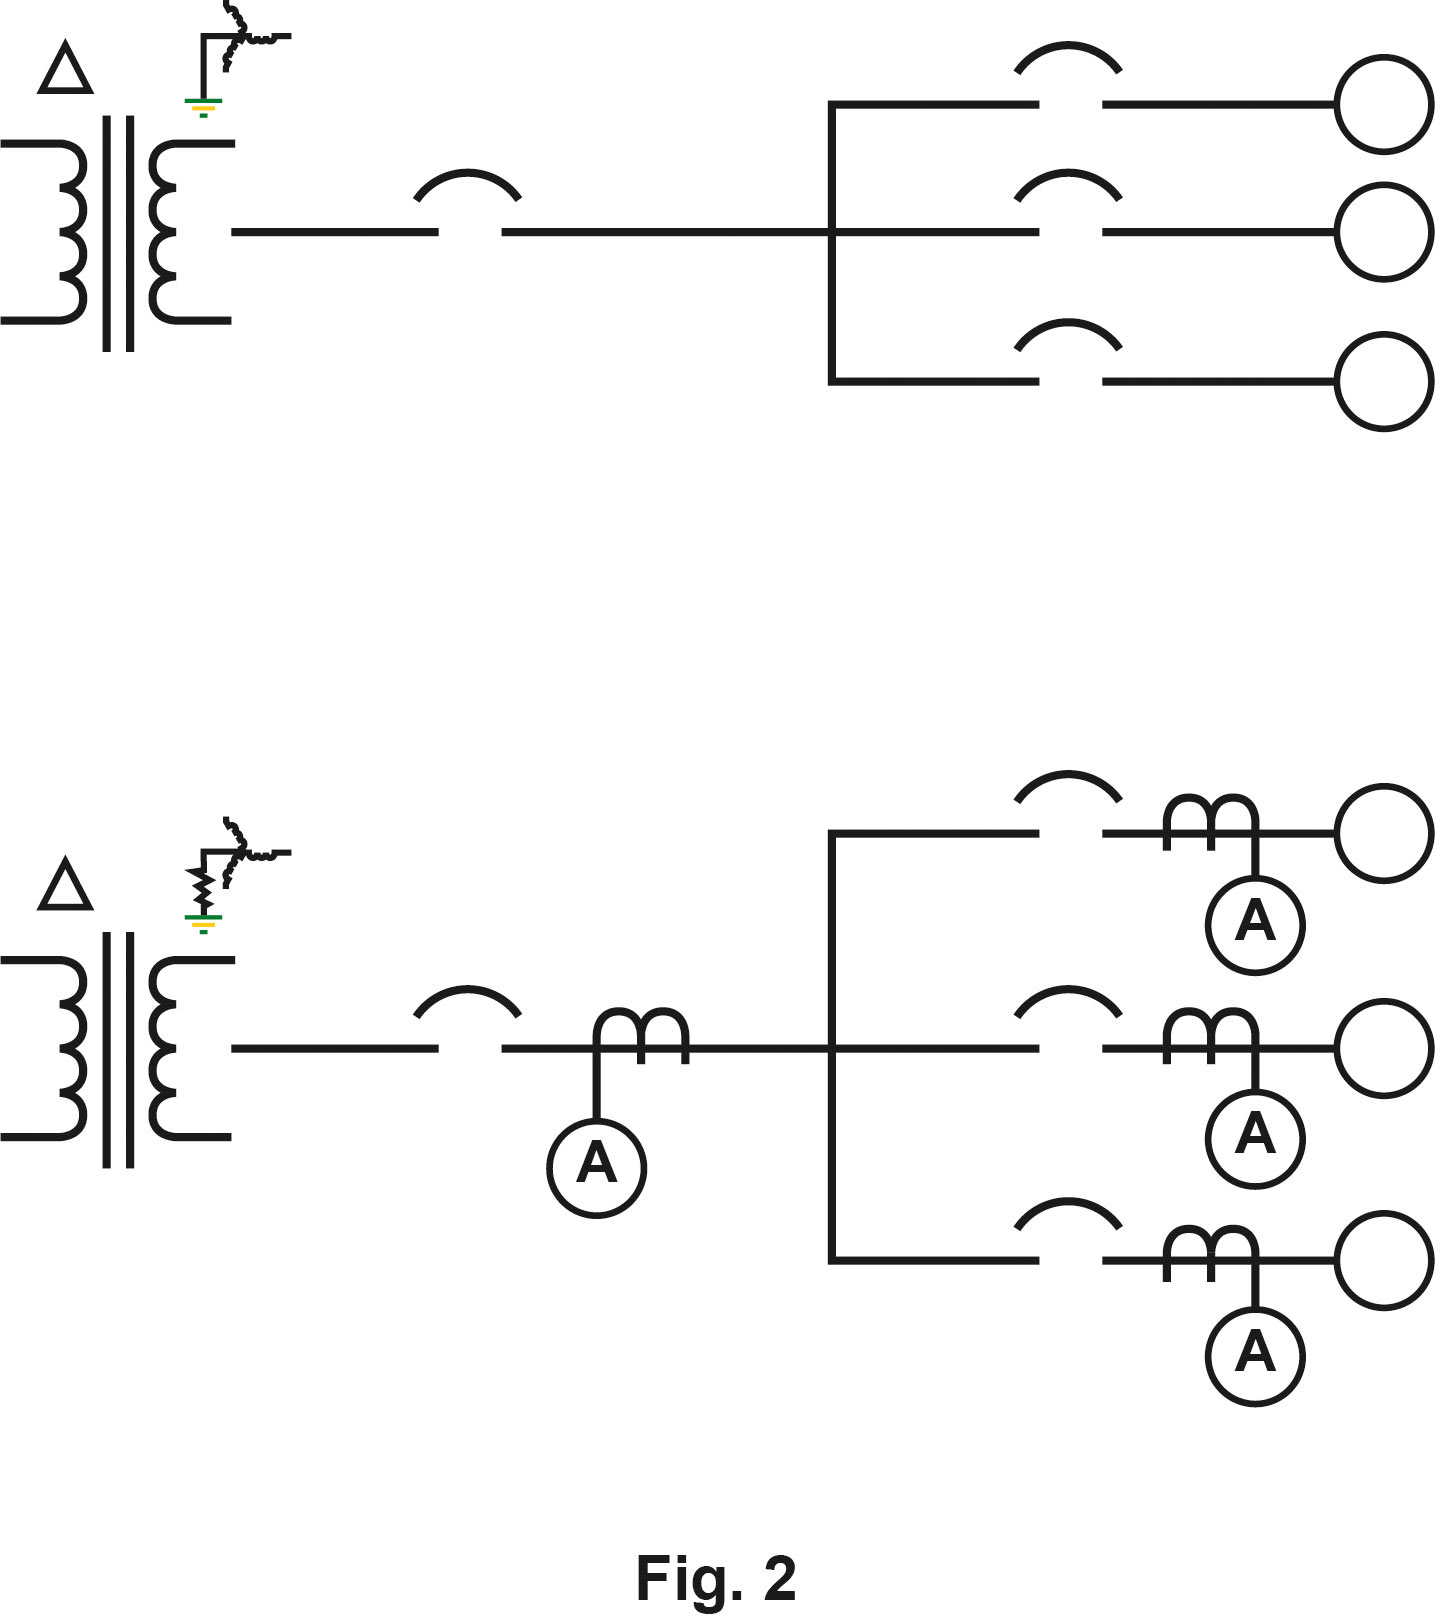 Grounding system with/ without CTs